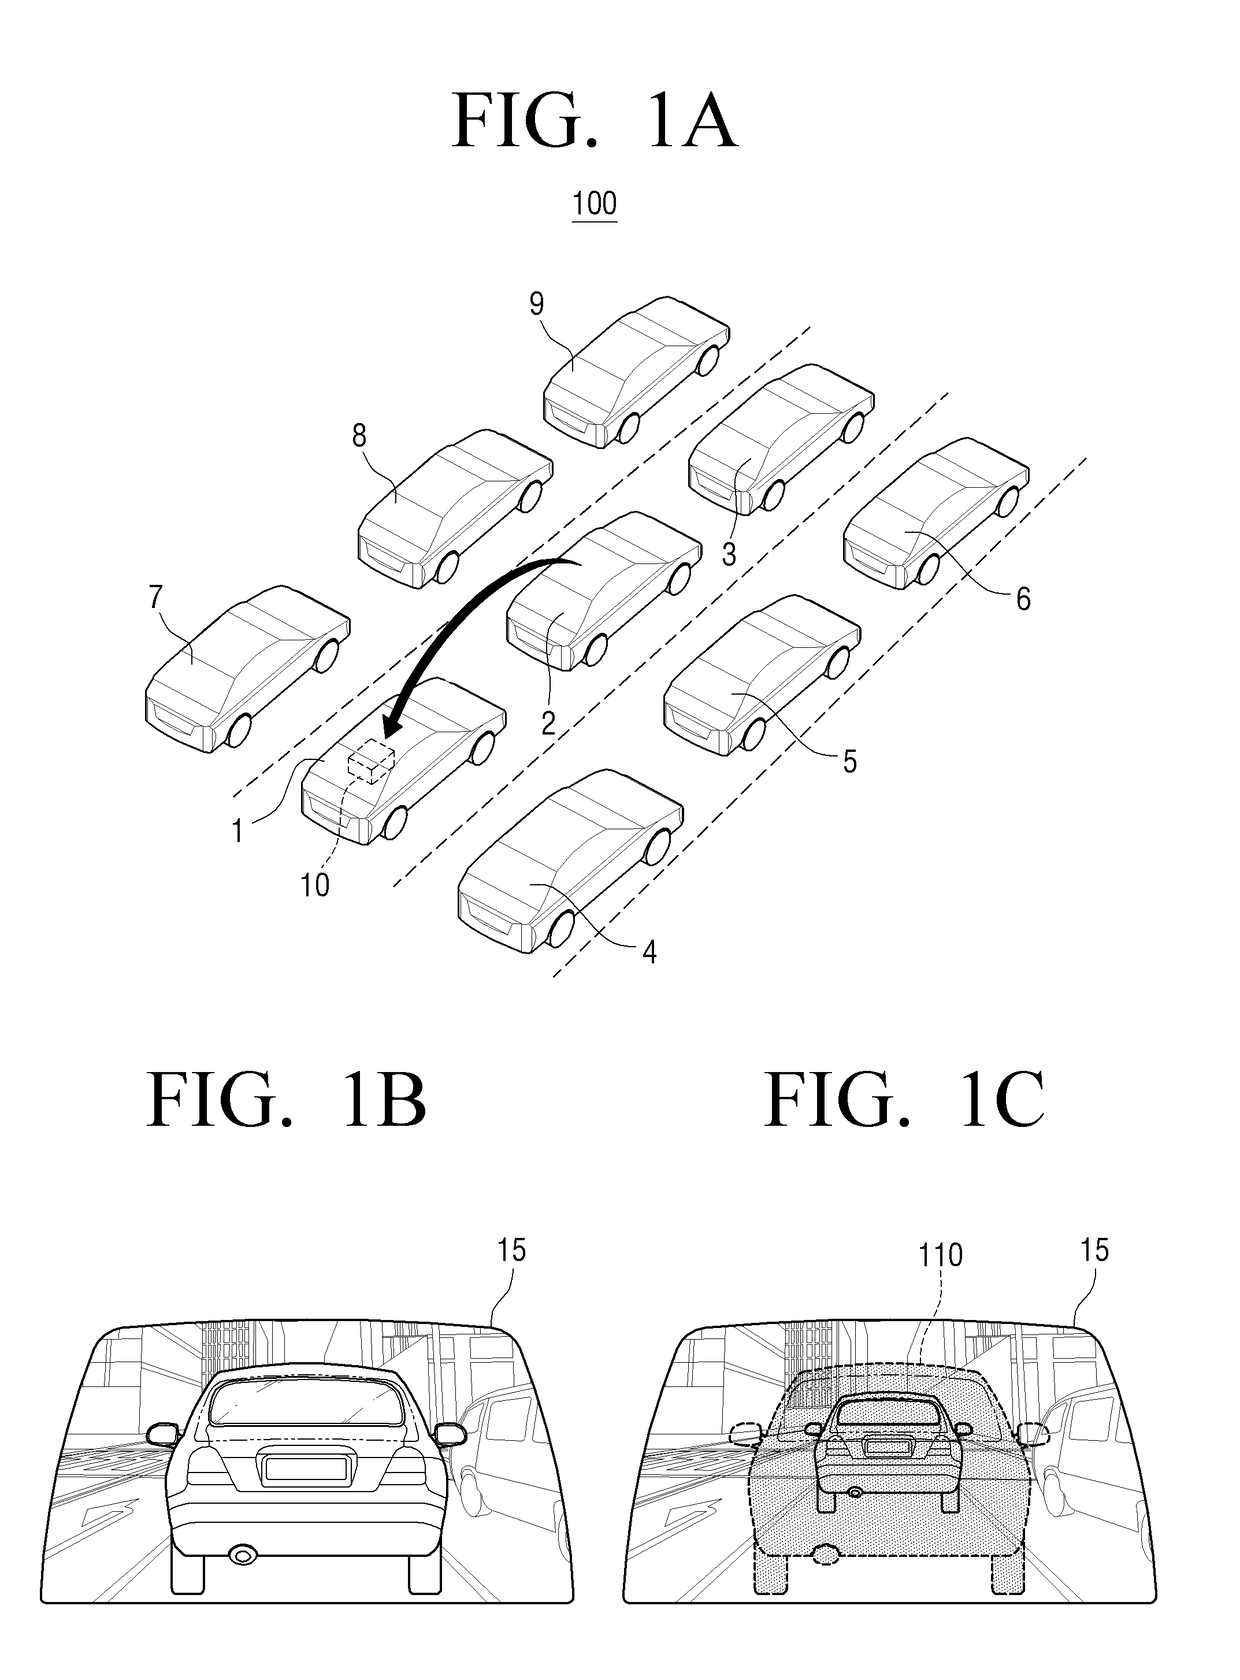 Method for providing a sight securing image to vehicle, electronic apparatus and computer readable recording medium therefor